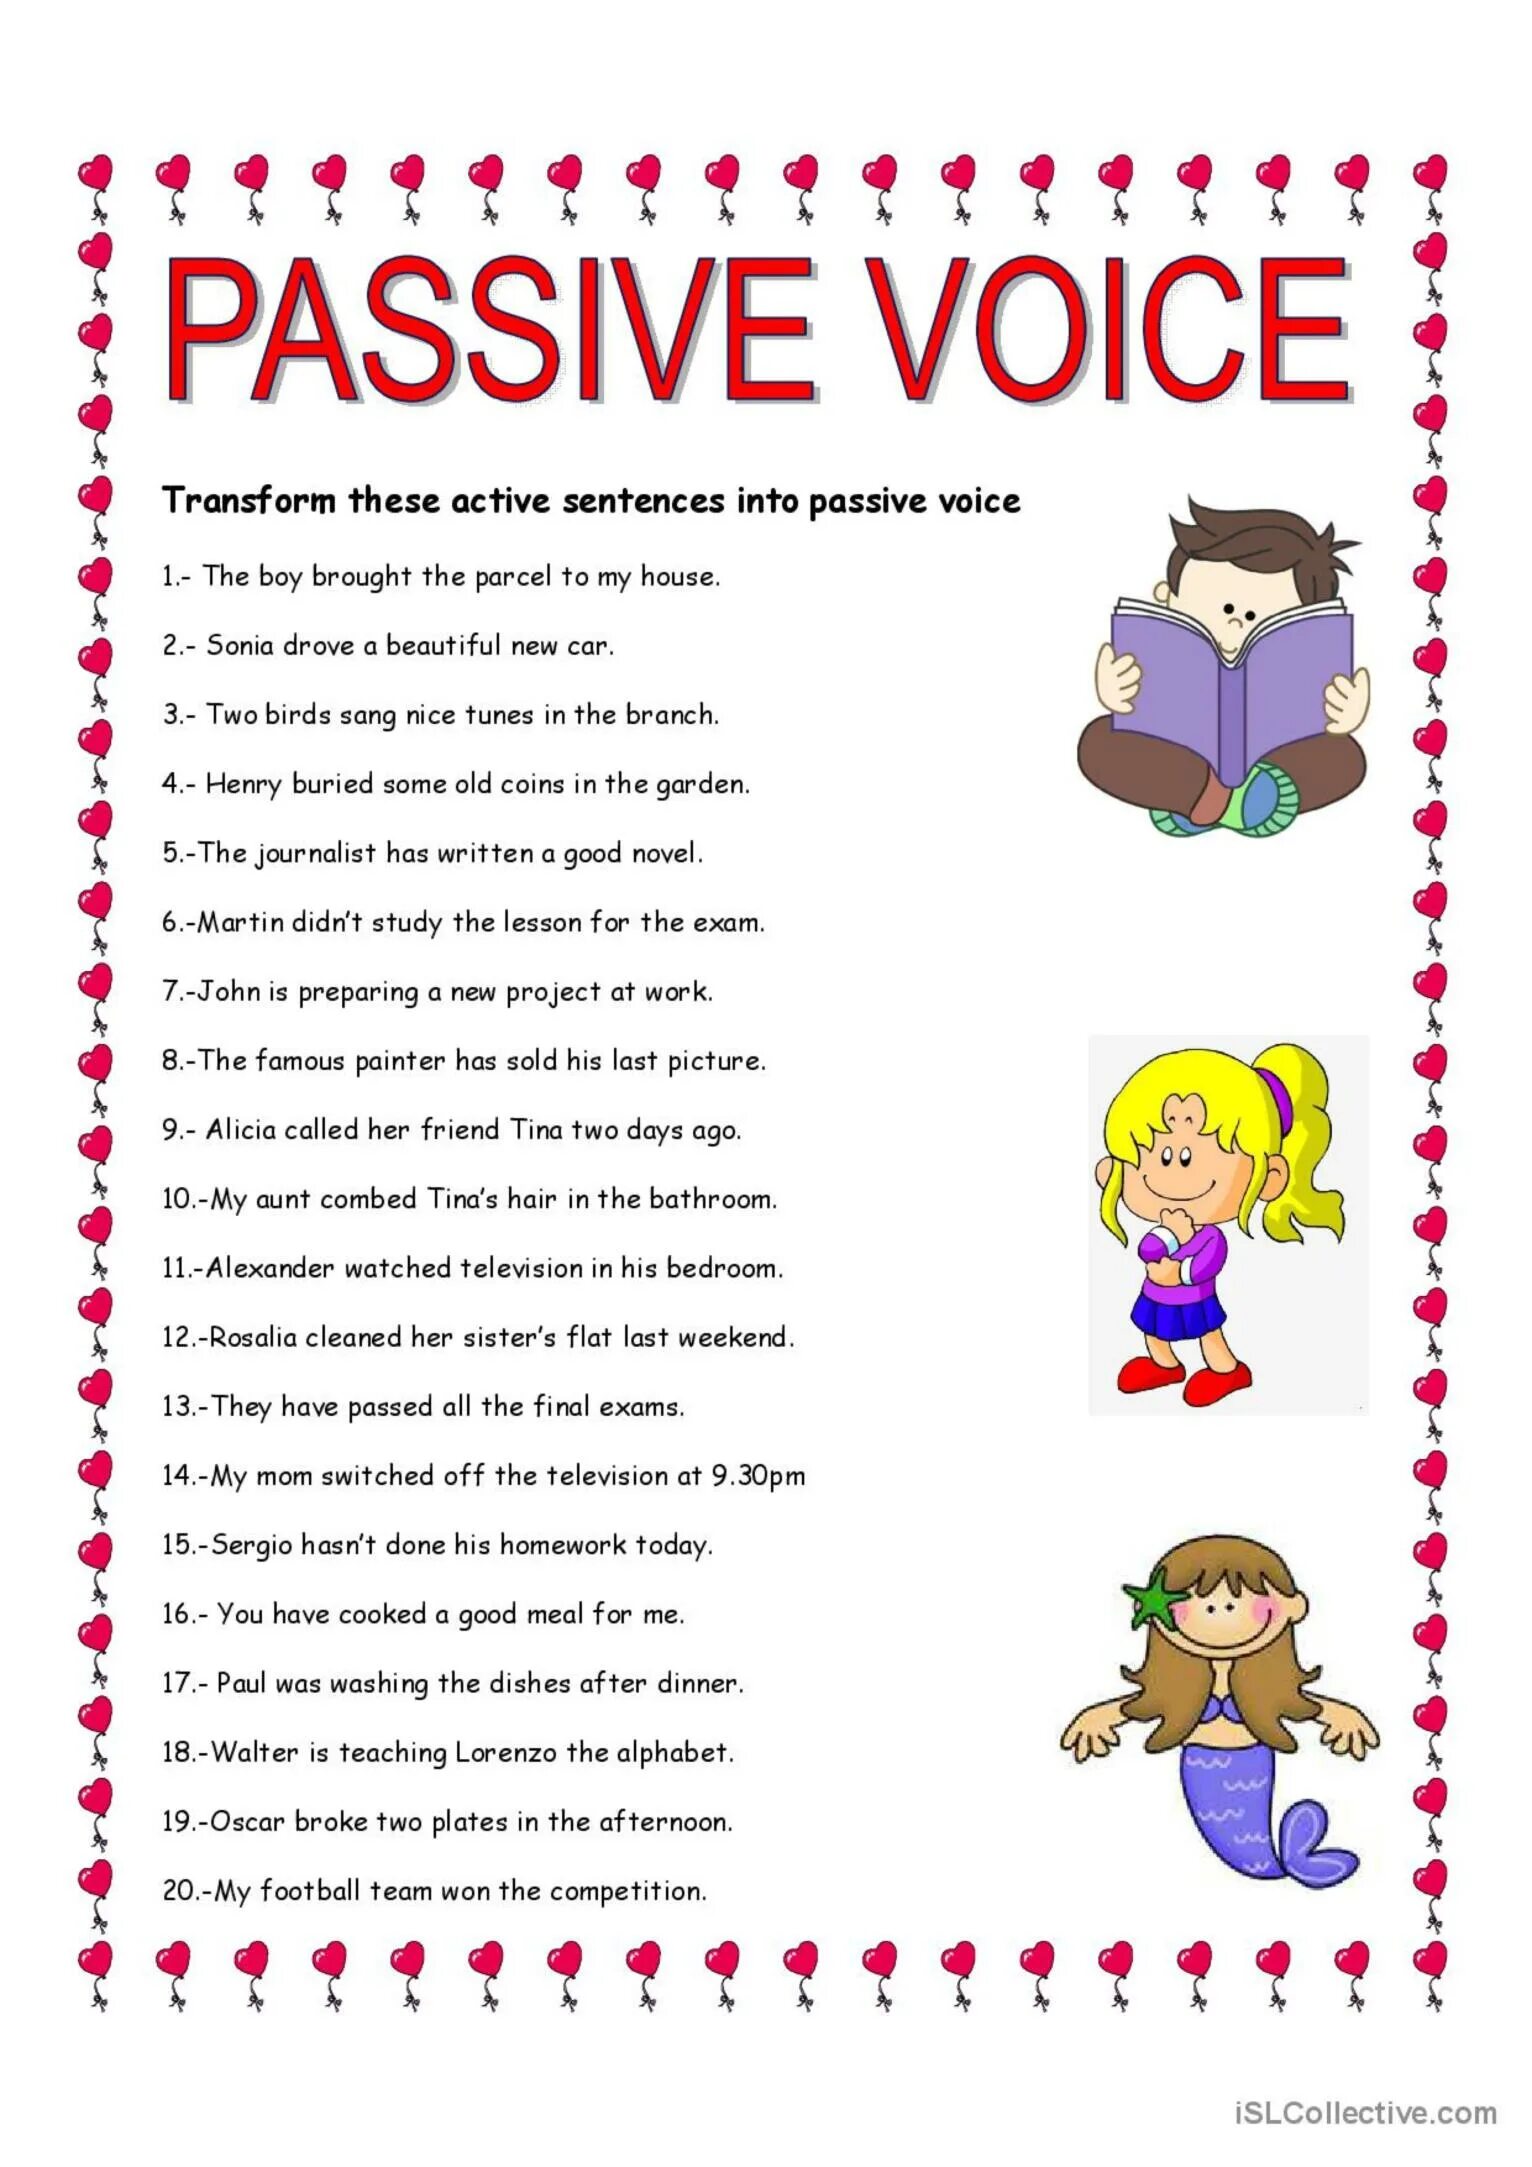 Passive voice games. Passive Voice speaking activities for Elementary. Passive Voice games and activities. Passive Voice Sheet activities. Passive Voice questions Worksheets.